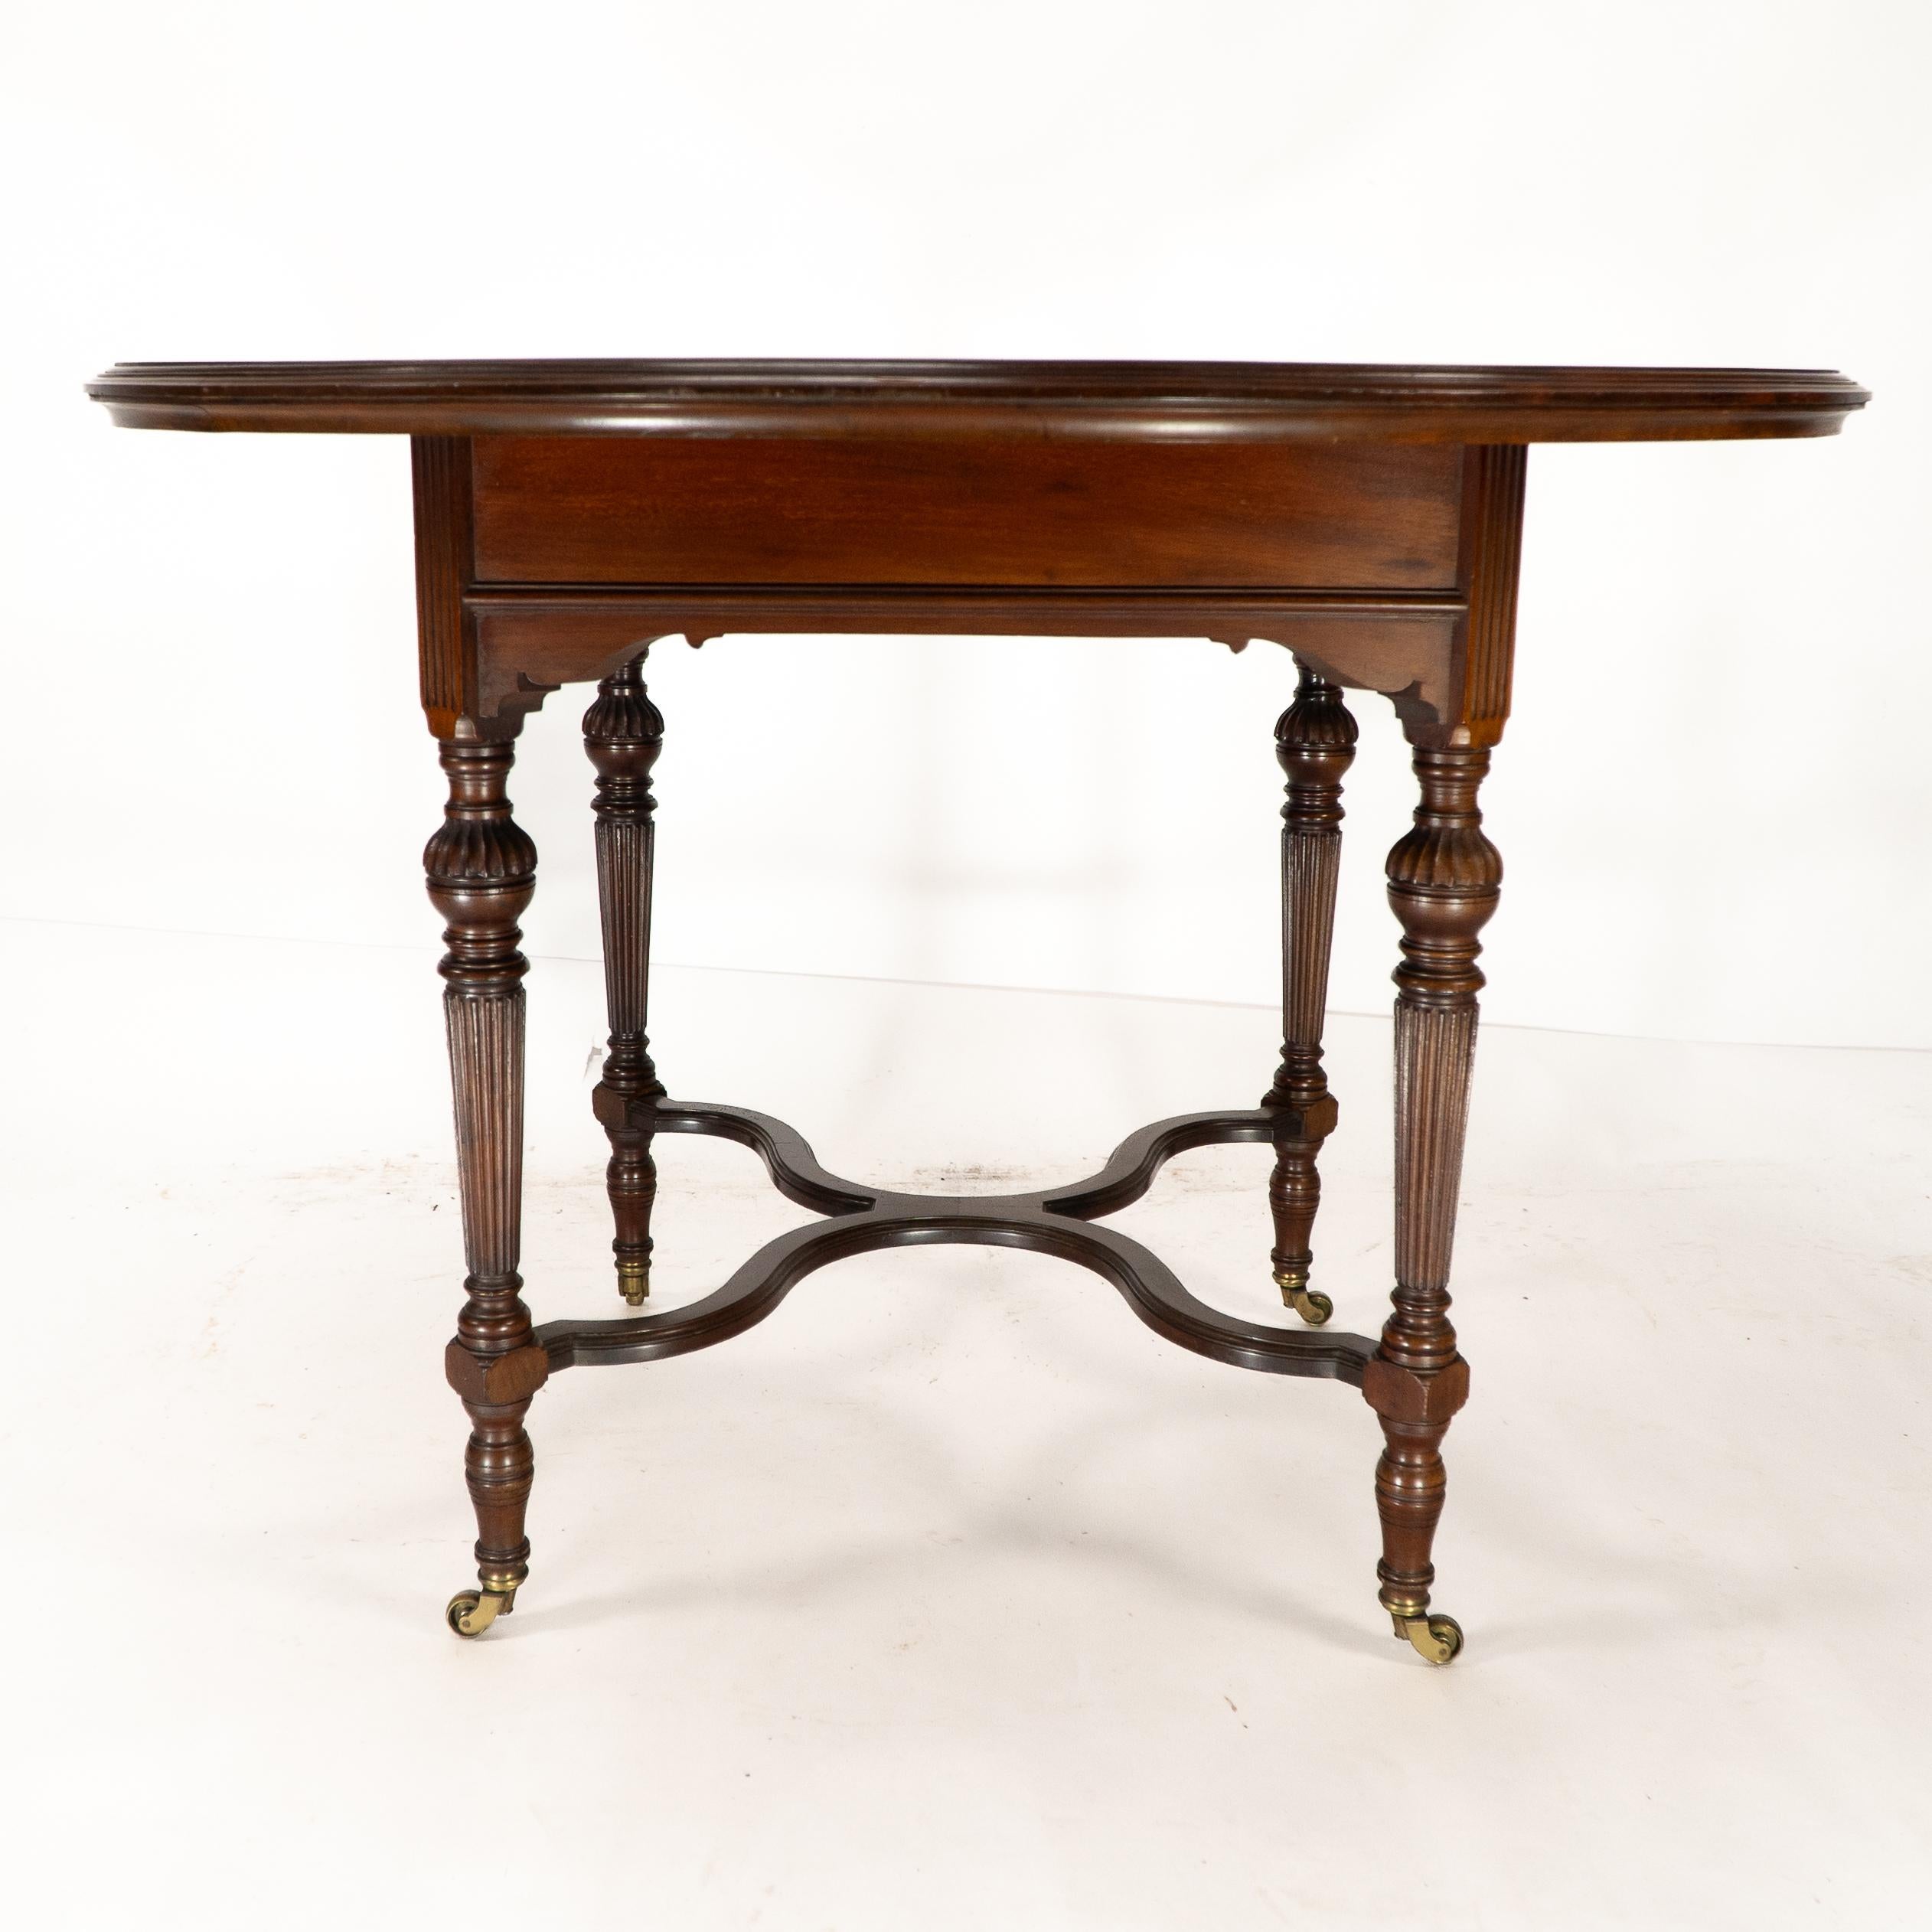 Collinson & Lock attributed. An Aesthetic Movement walnut circular center table For Sale 3